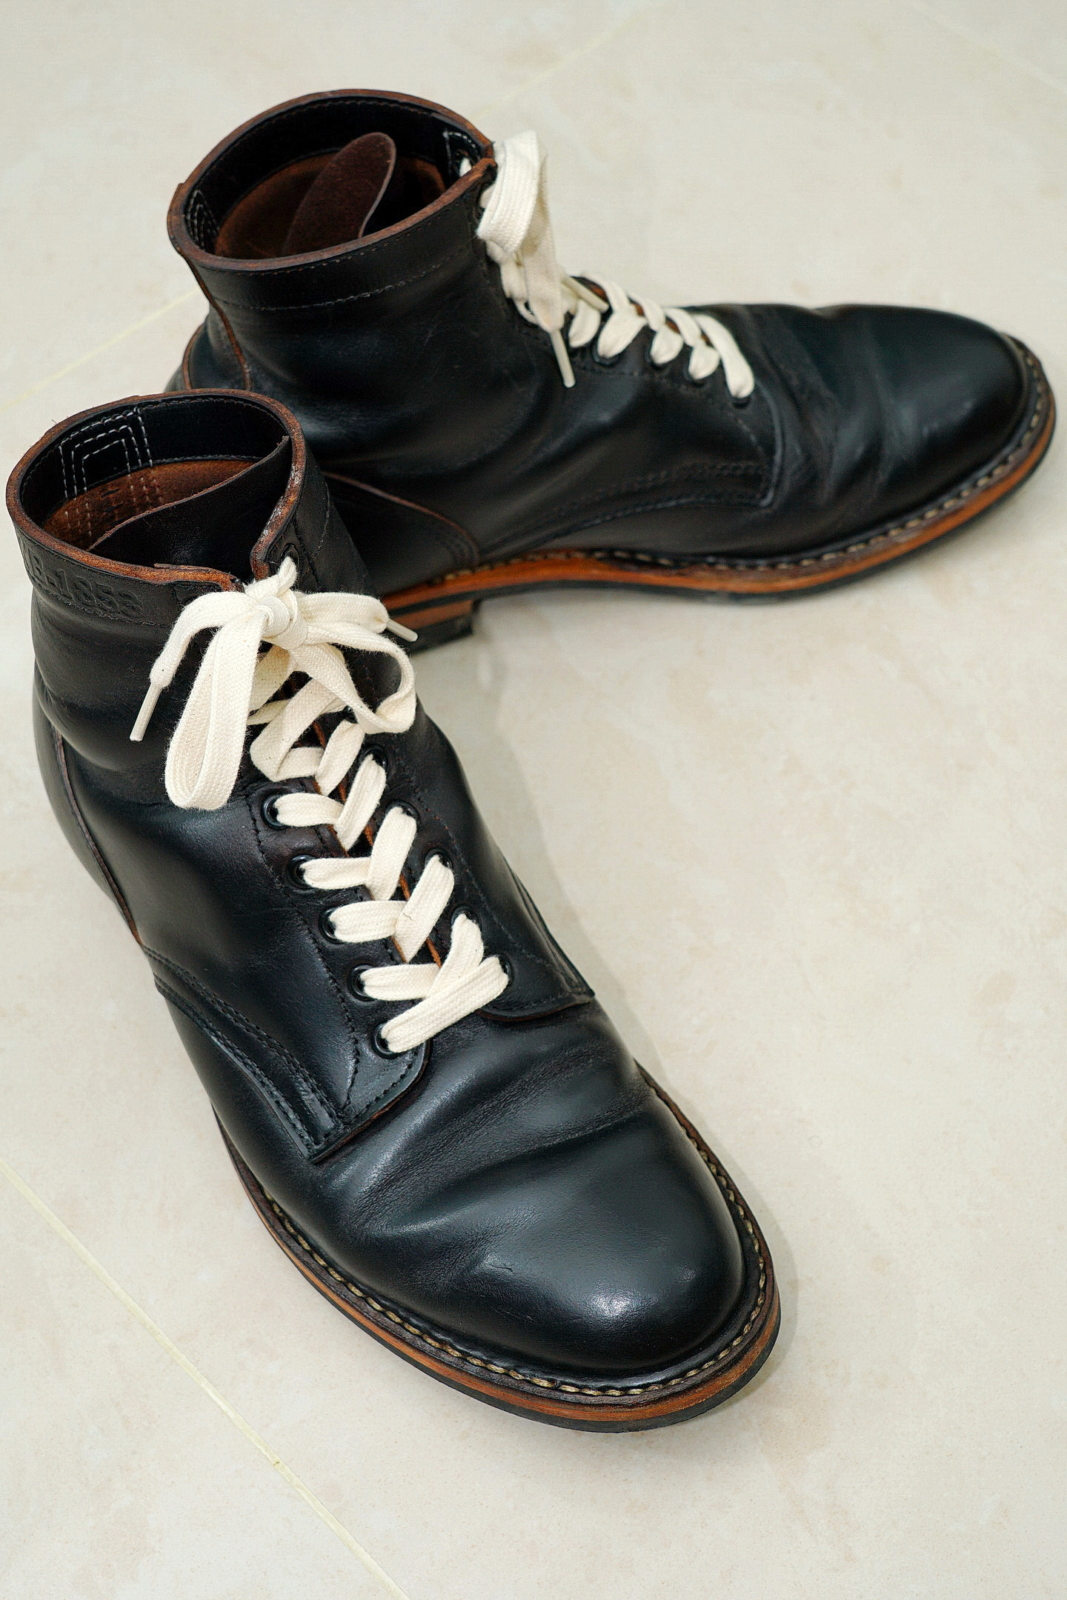 White's MP Service Boots 5Inches Horween CXL BLK 軍警靴， Stylish Pose 6